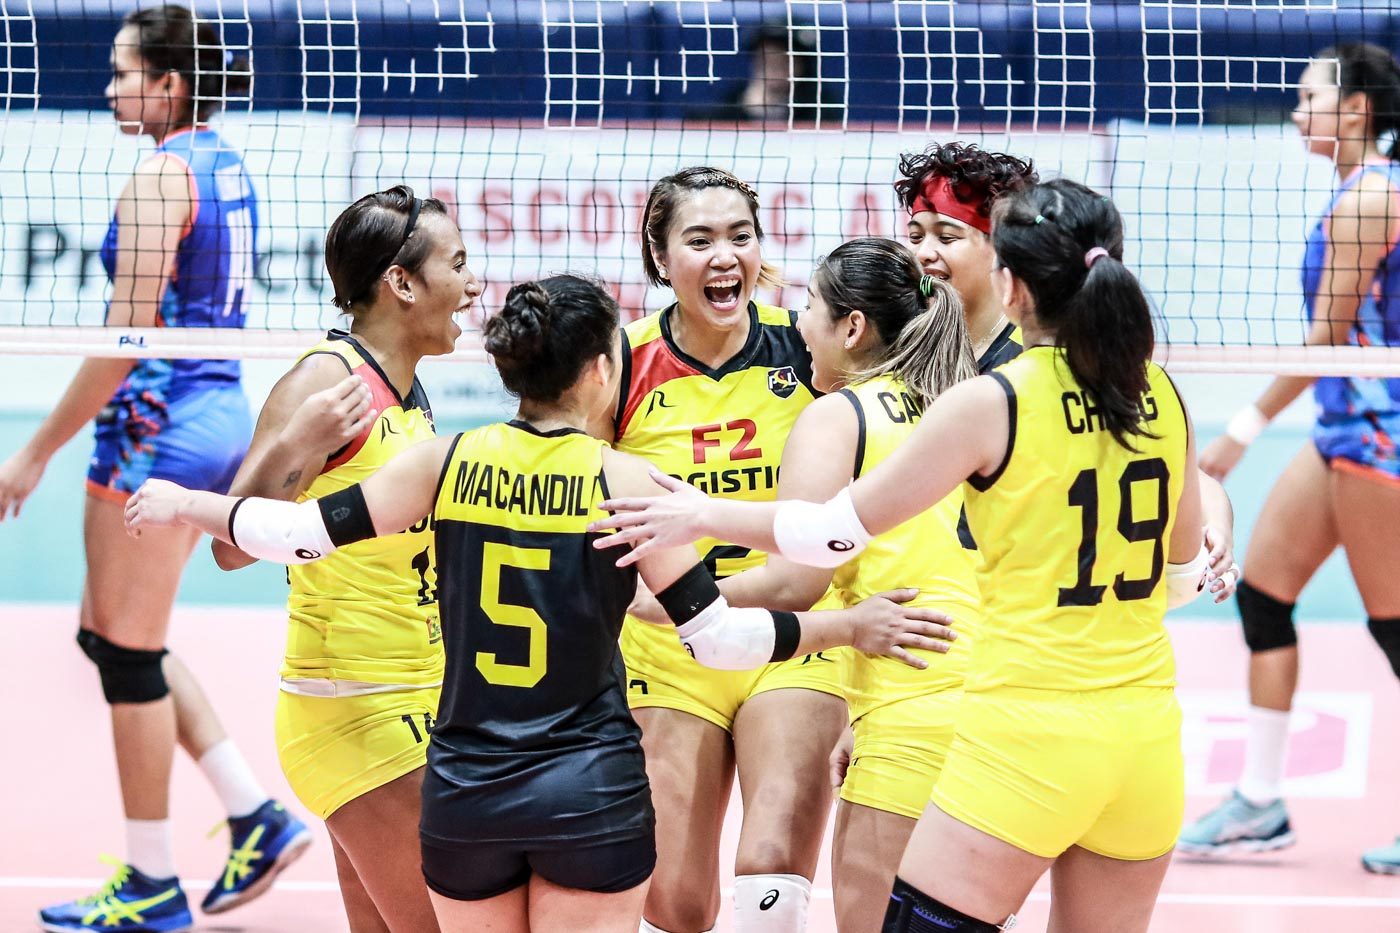 GMA to broadcast PSL as Cignal Spikers move to Premier Volleyball League